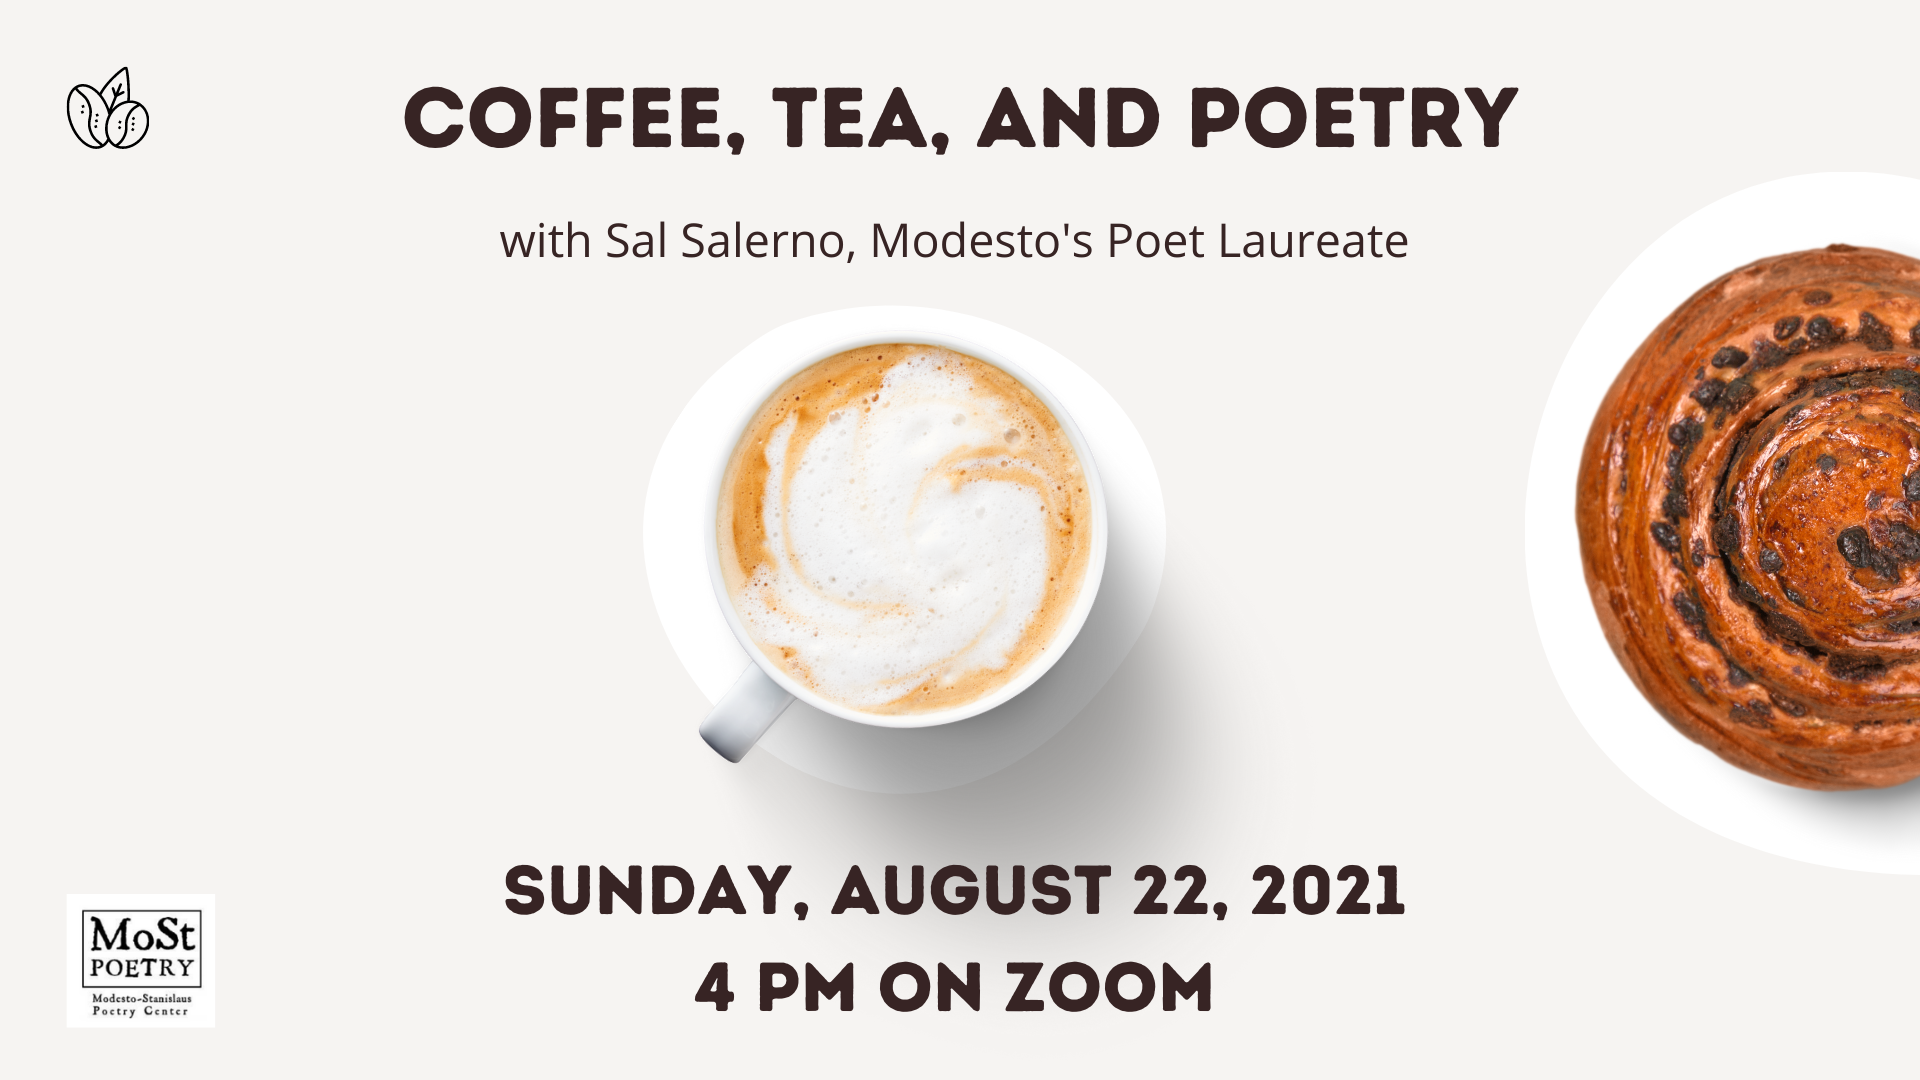 ID: Coffee, Tea, and Poetry, Sunday April 22, 2021, at 4:00 pm